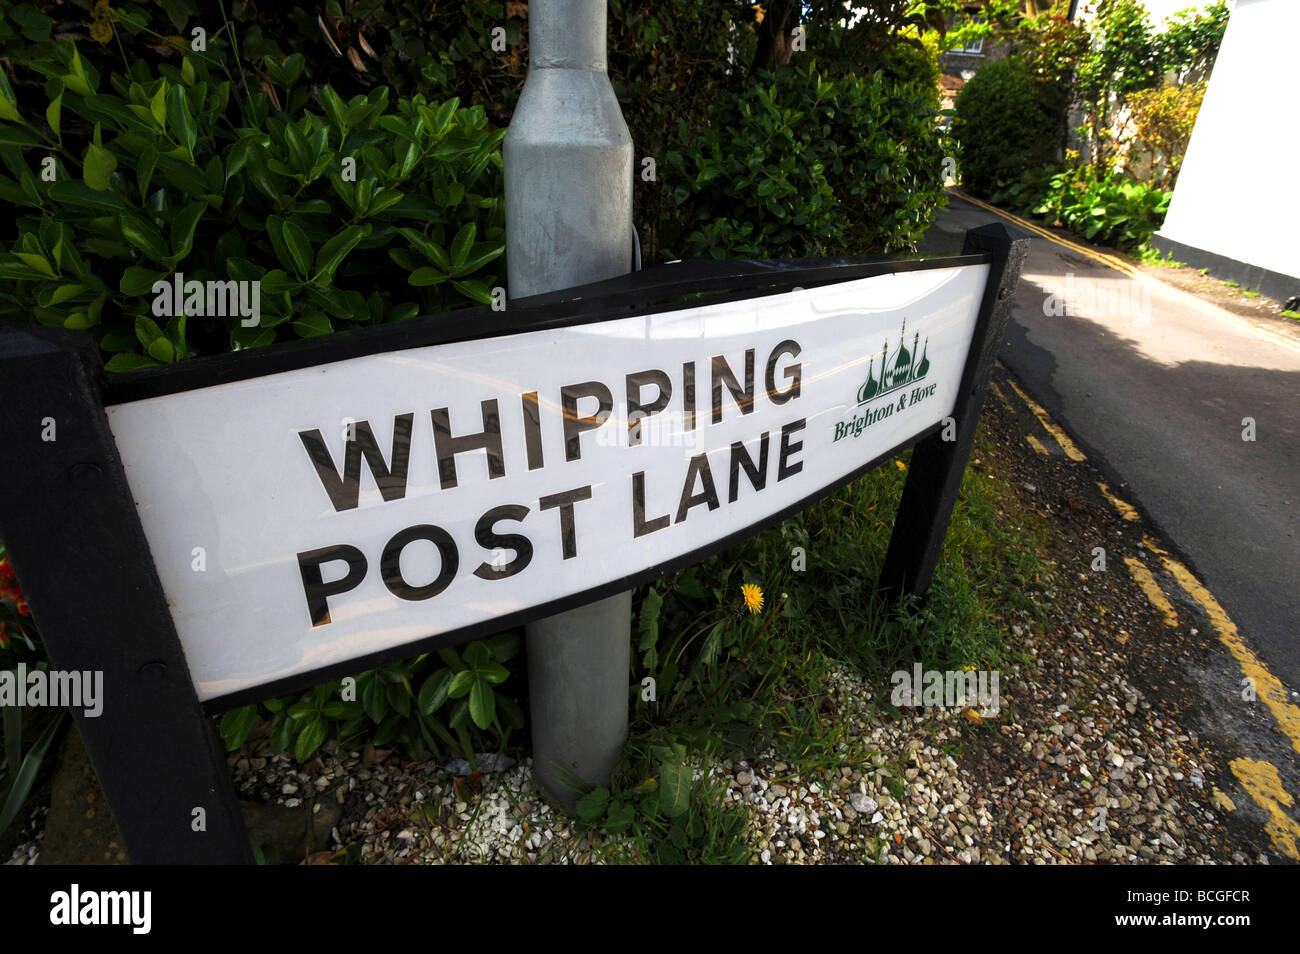 Whipping post lane in the historic village of rottingdean Stock Photo